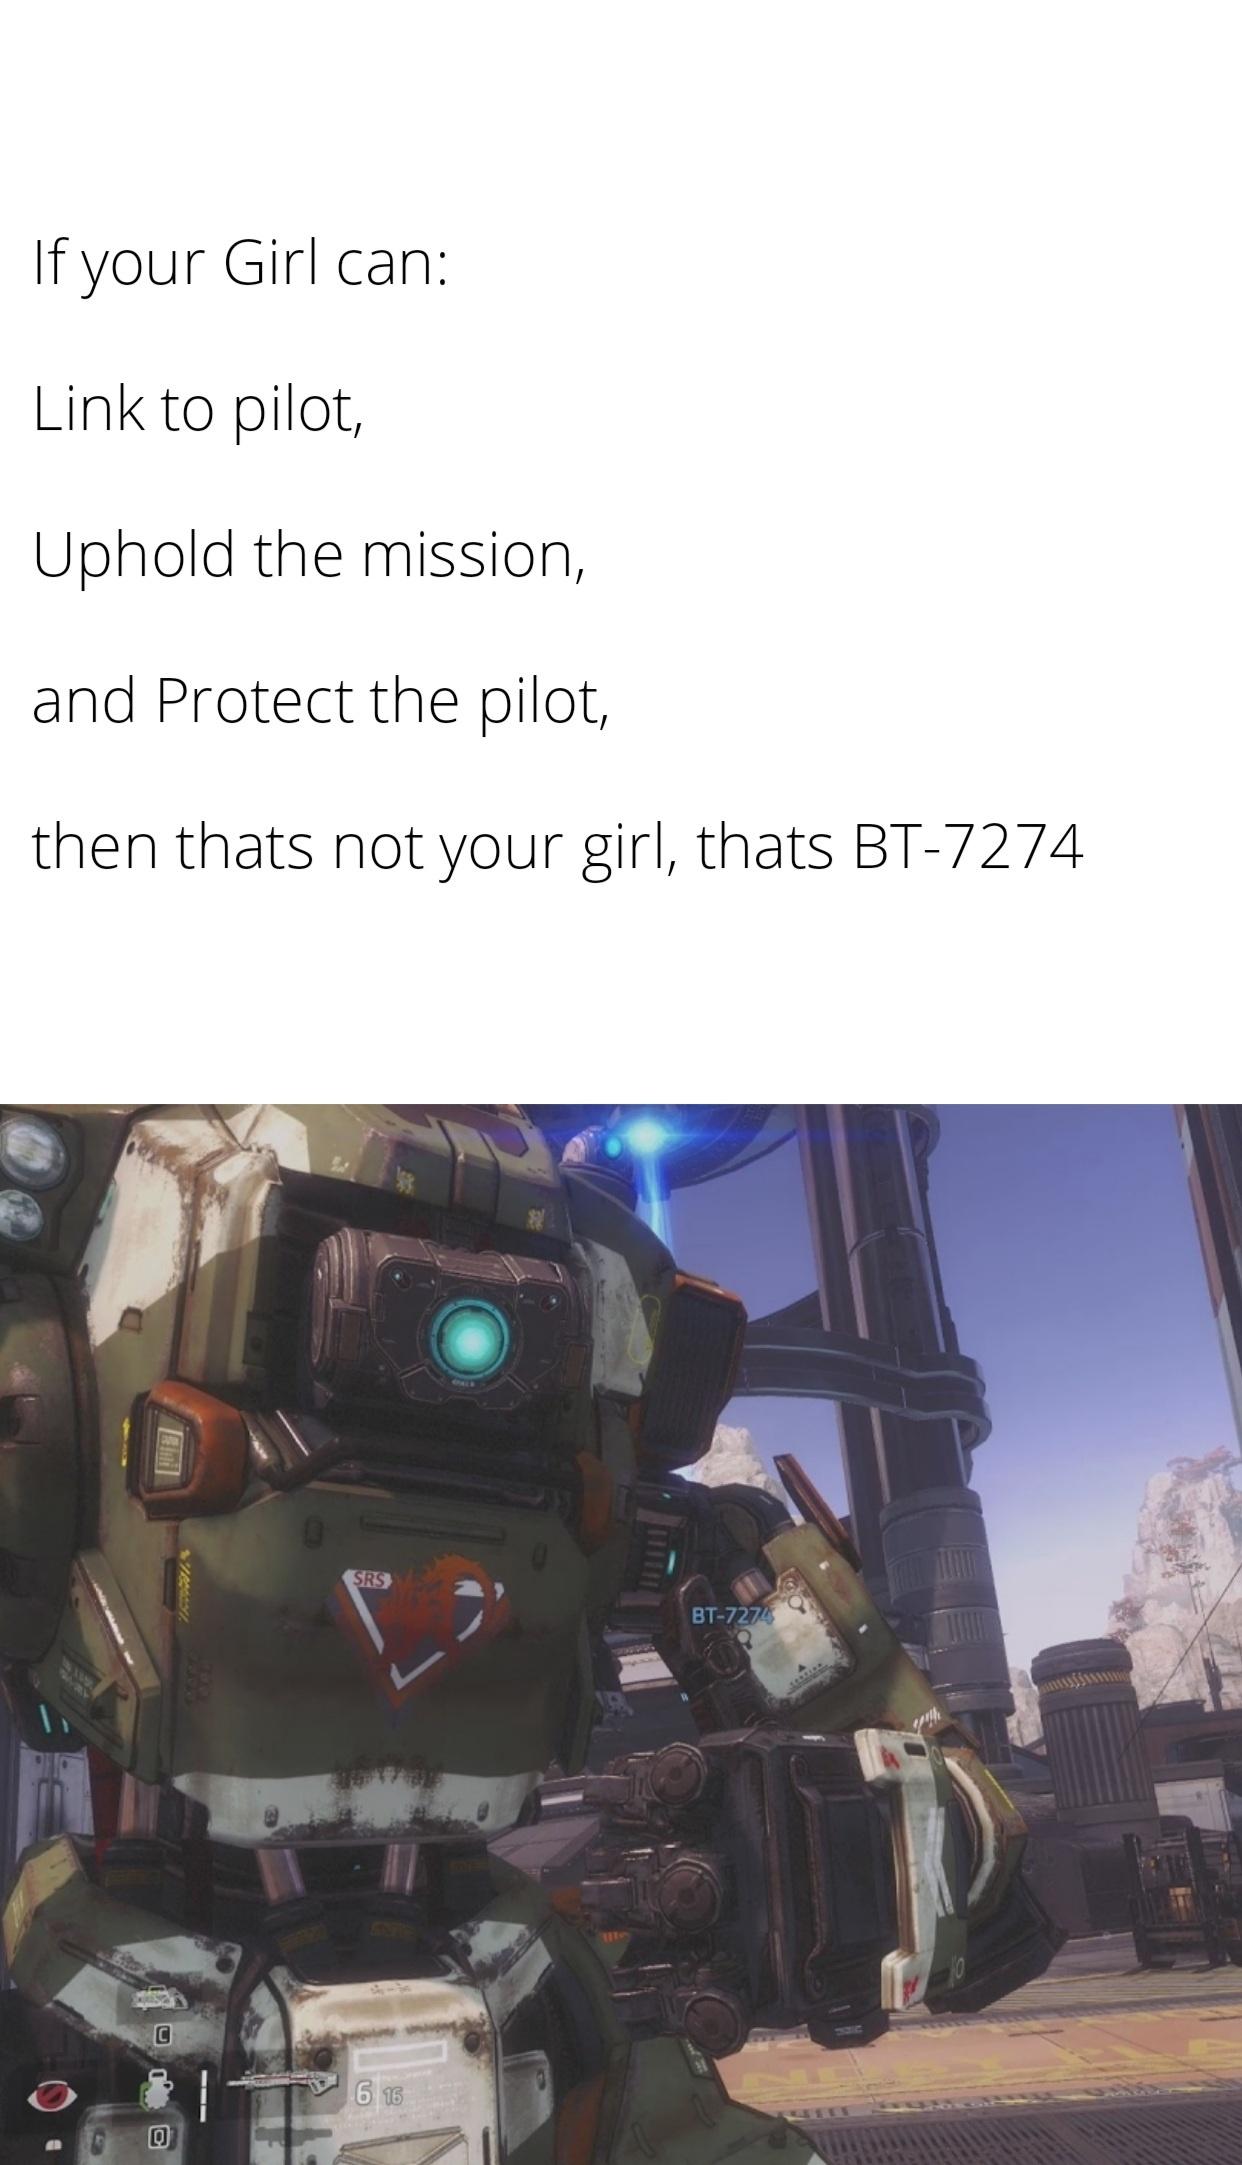 vehicle - If your Girl can Link to pilot, Uphold the mission, and Protect the pilot, then thats not your girl, thats Bt7274 Srs Bt7274 C 6 16